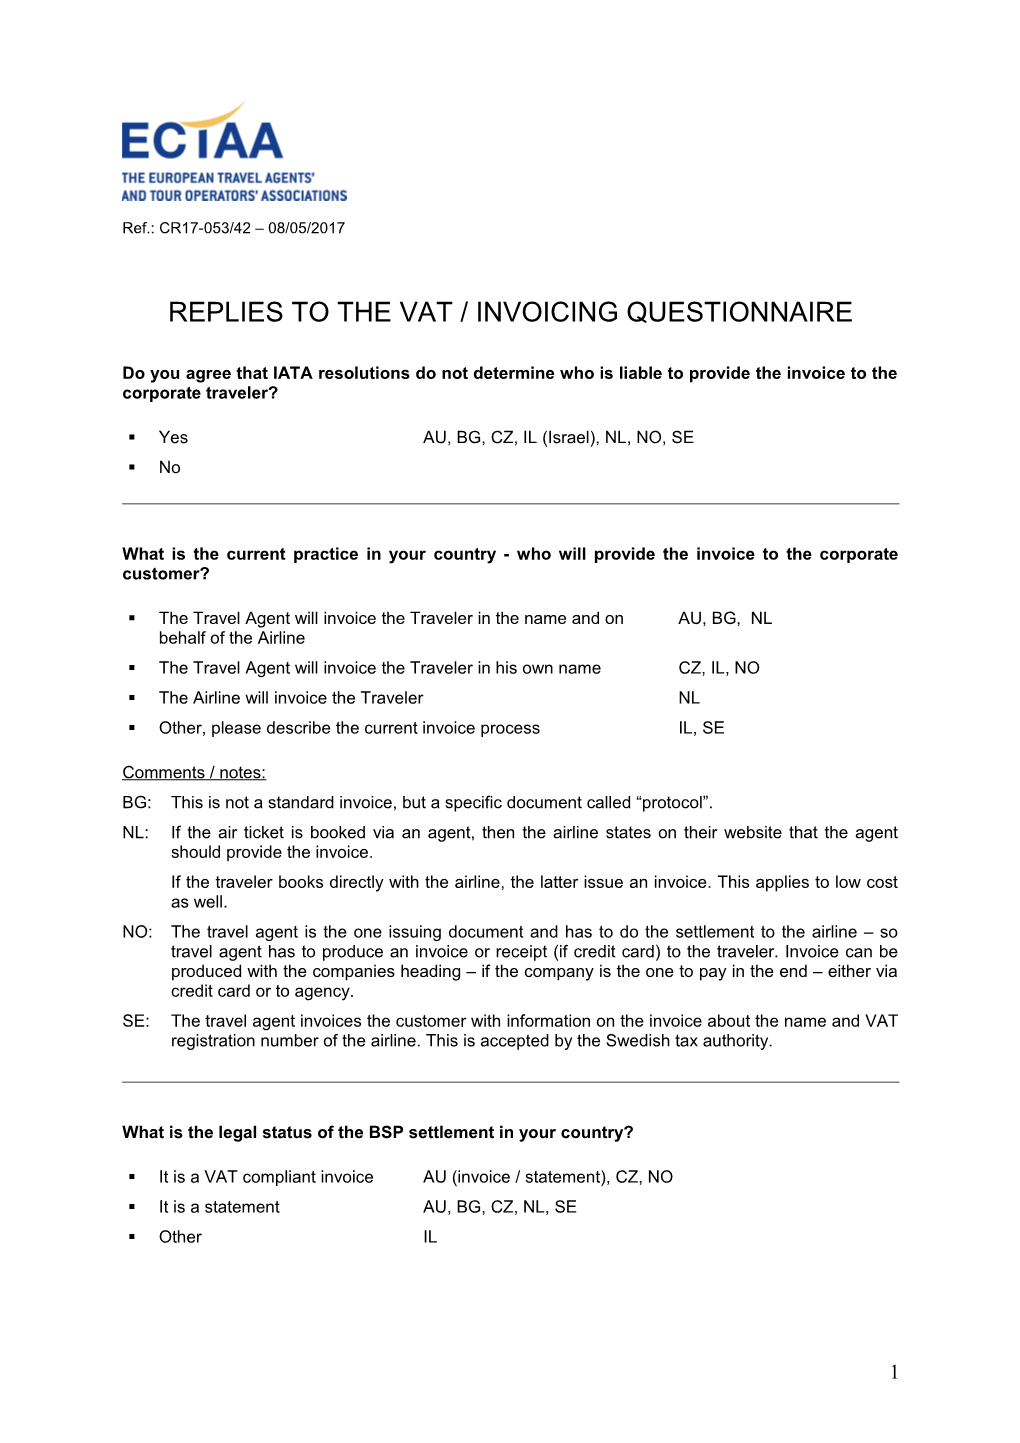 Replies to the Vat / Invoicing Questionnaire